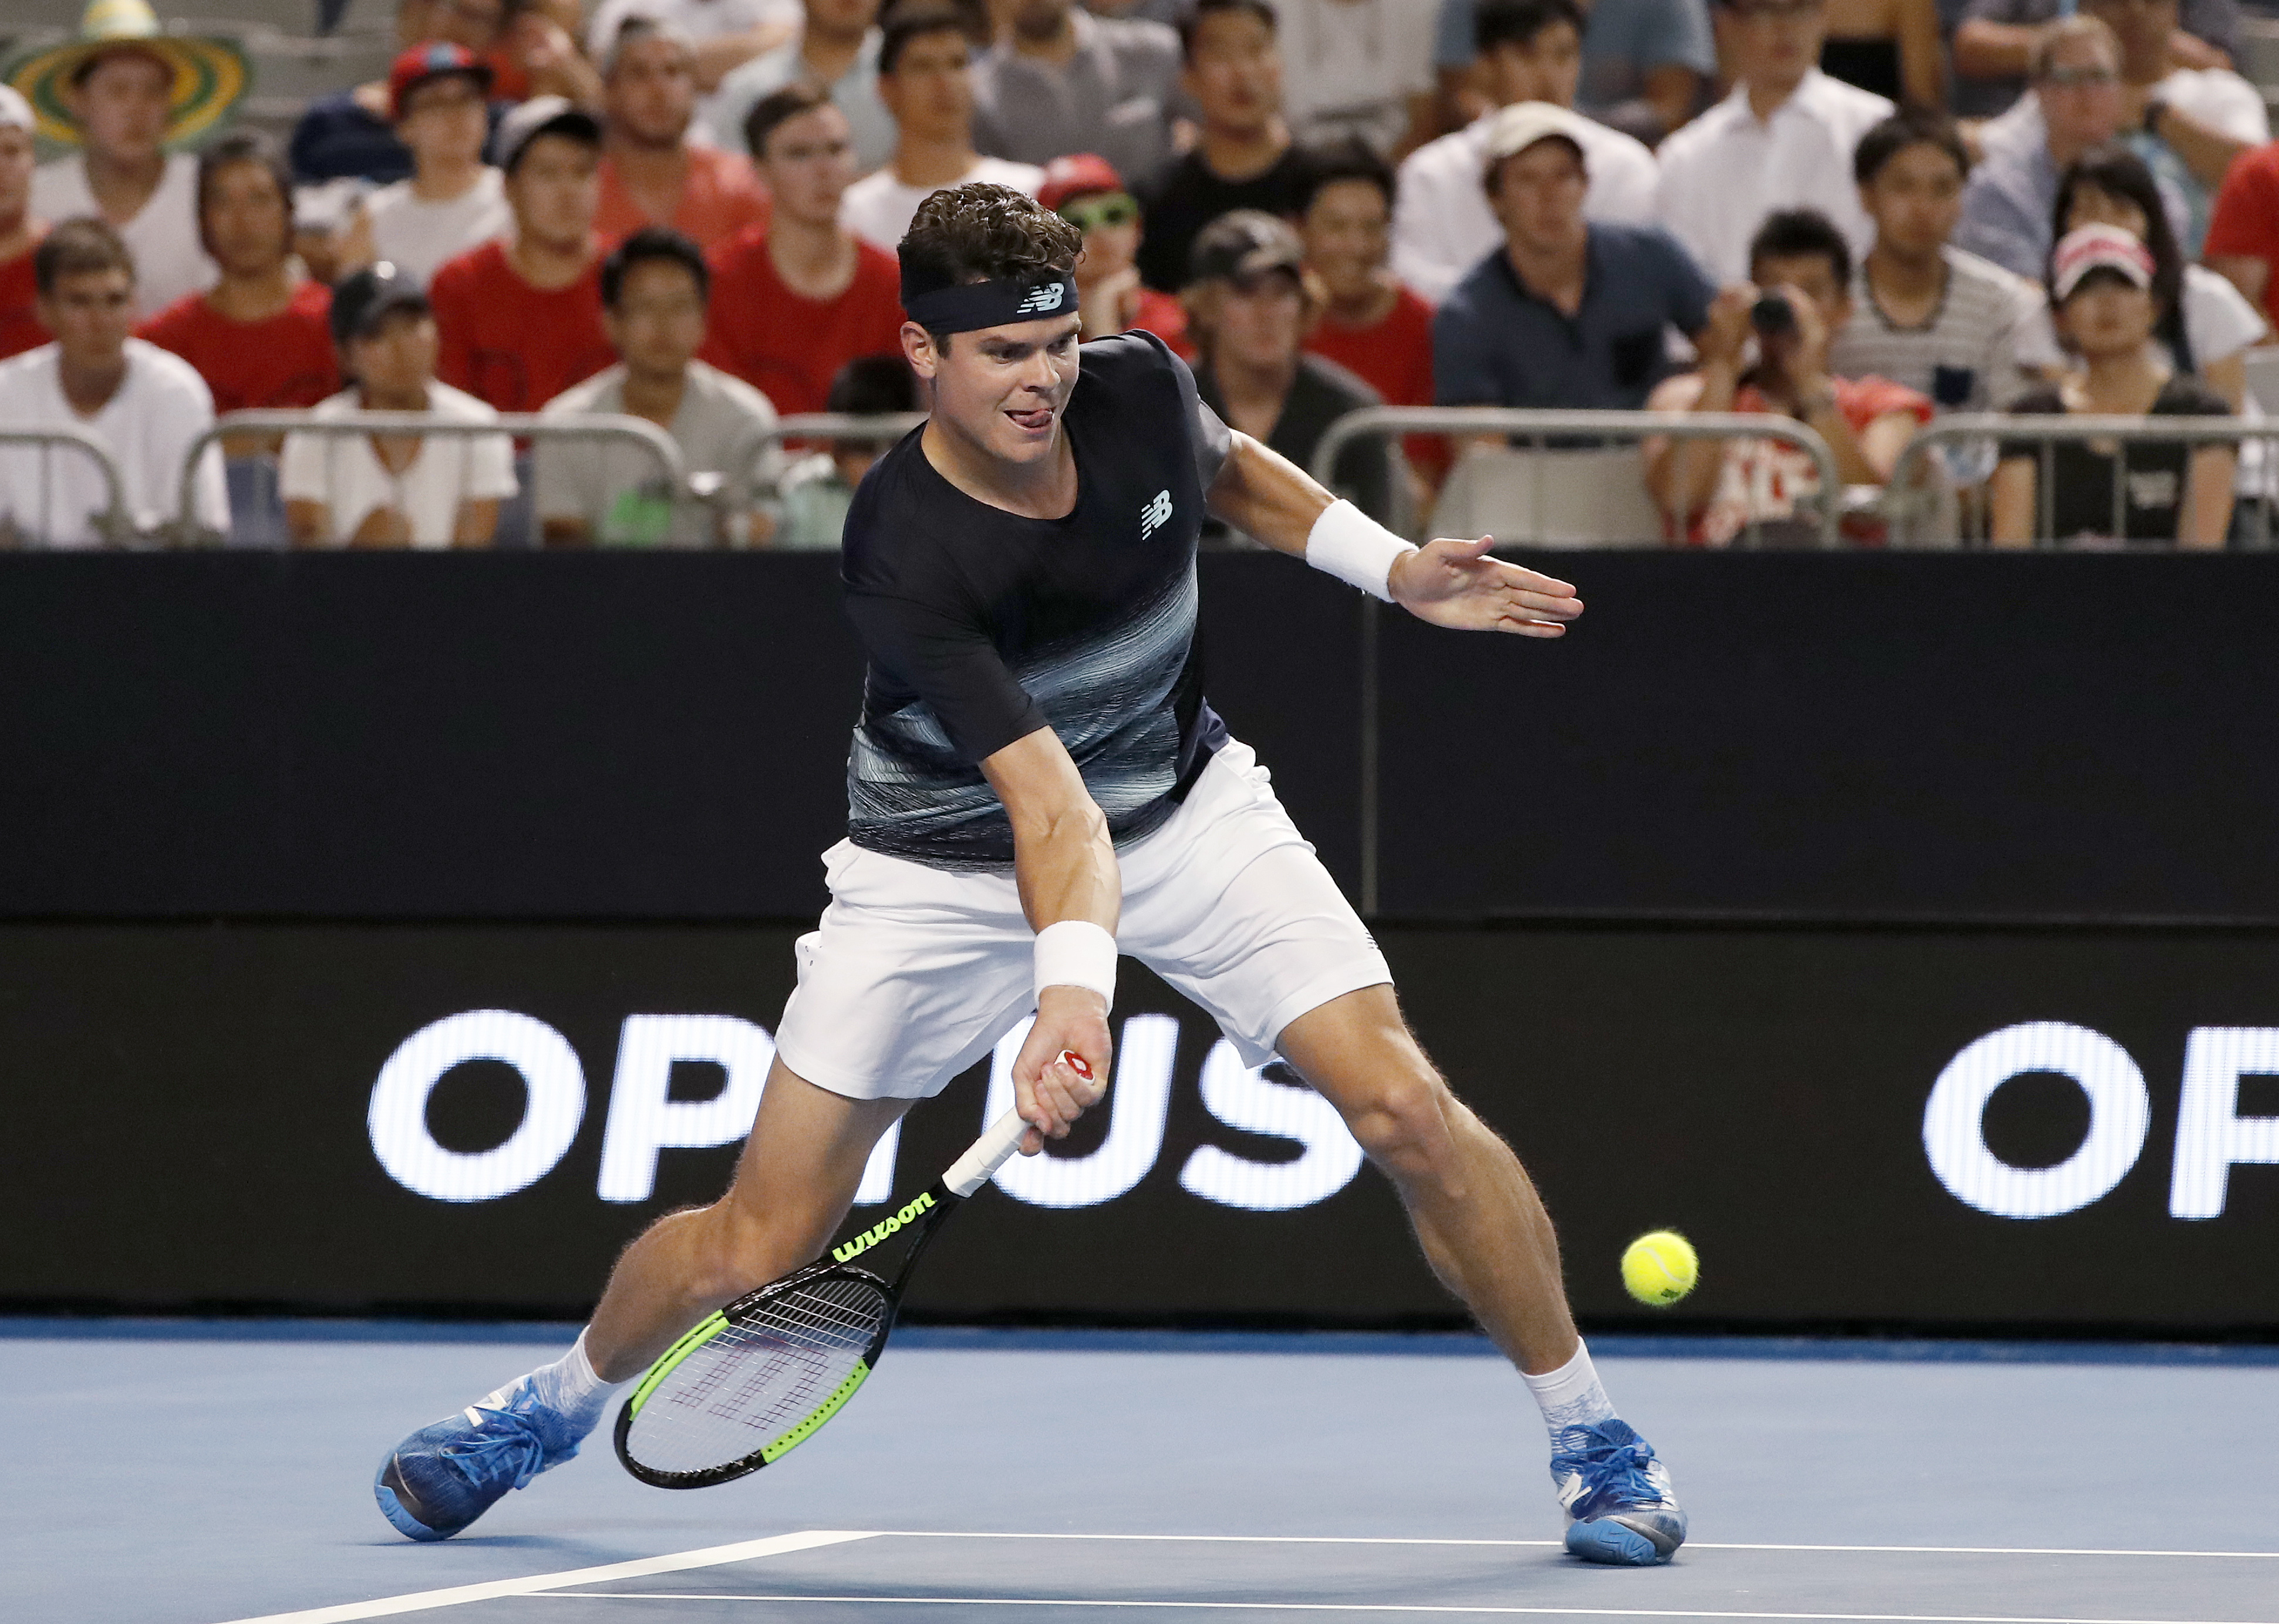 Canada's Milos Raonic plays a low forehand to Spain's Roberto Bautista Agut during their fourth round match at the Australian Open tennis championships in Melbourne, Australia, Monday, Jan. 23, 2017. (AP Photo/Dita Alangkara)